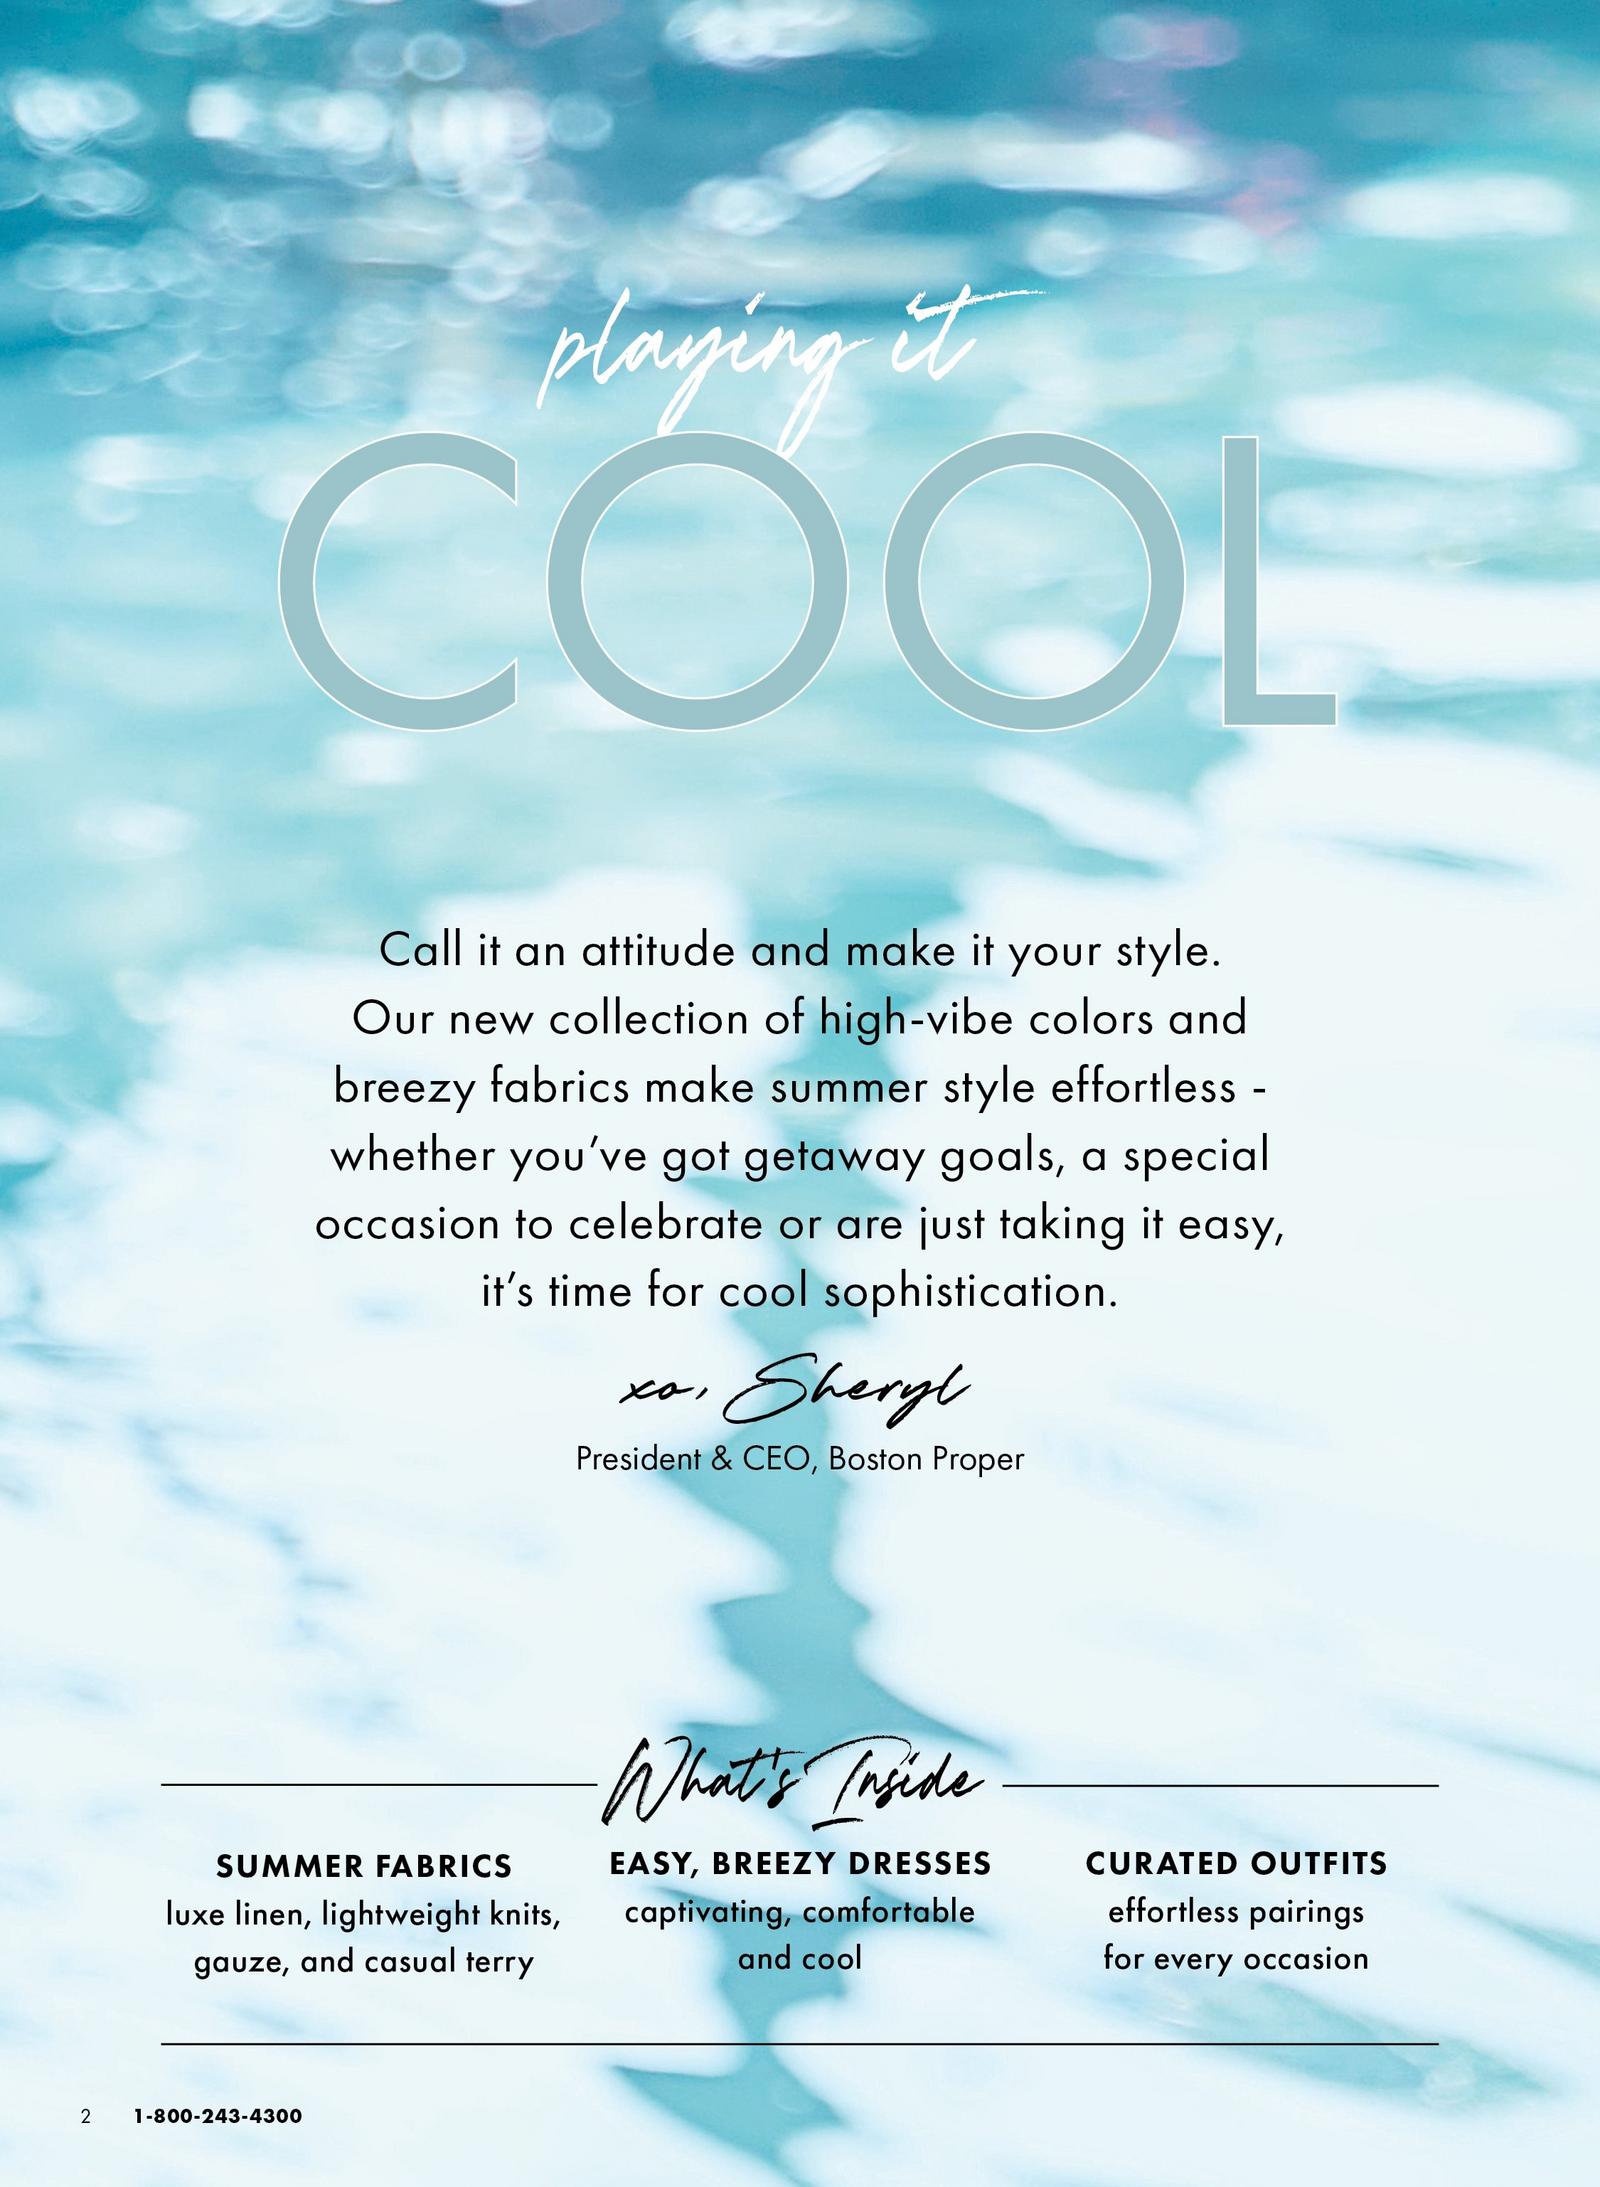 A background of light blue rippling water is covered by the CEO's description of our new collection.